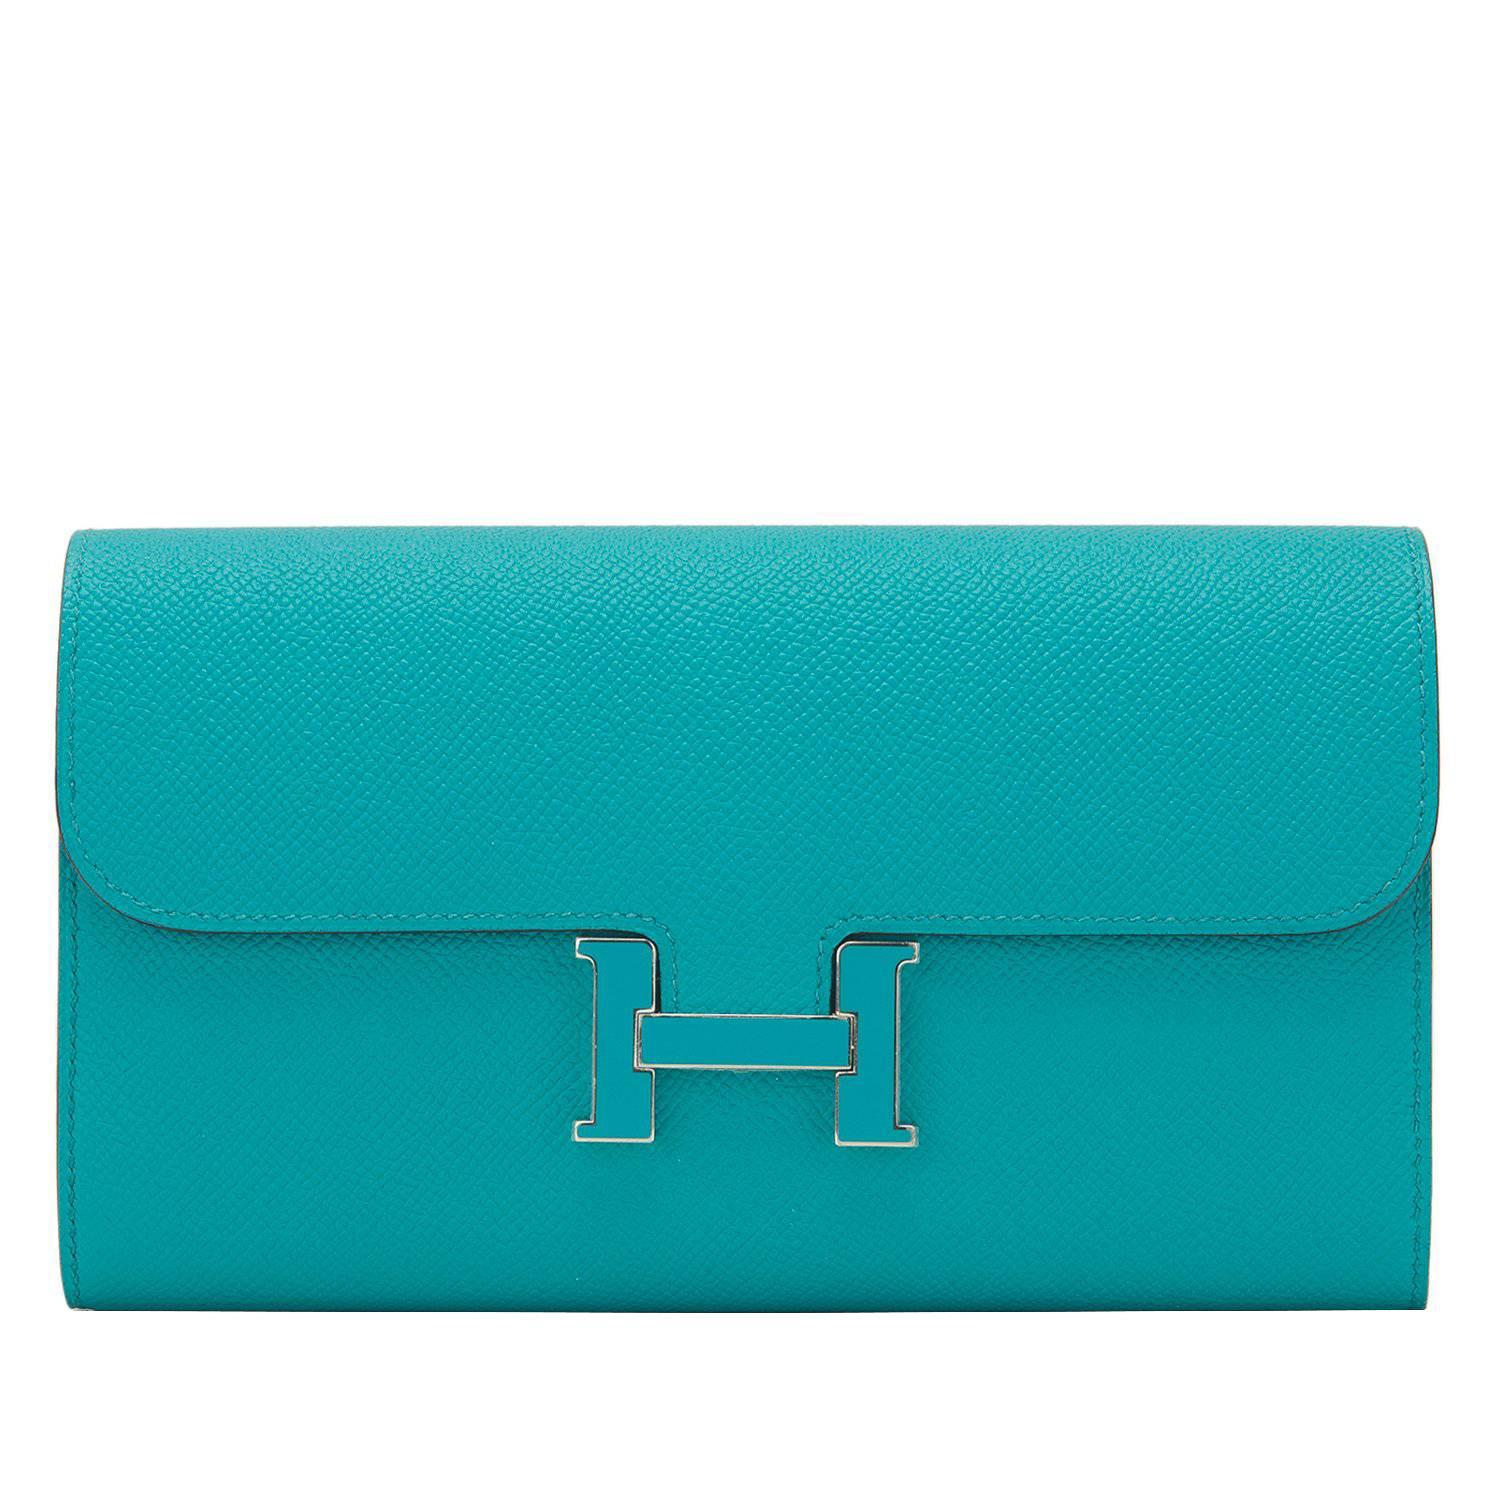 Hermes Blue Paon Epsom Blue Paon Lacquer H Constance Long Wallet Clutch For Sale